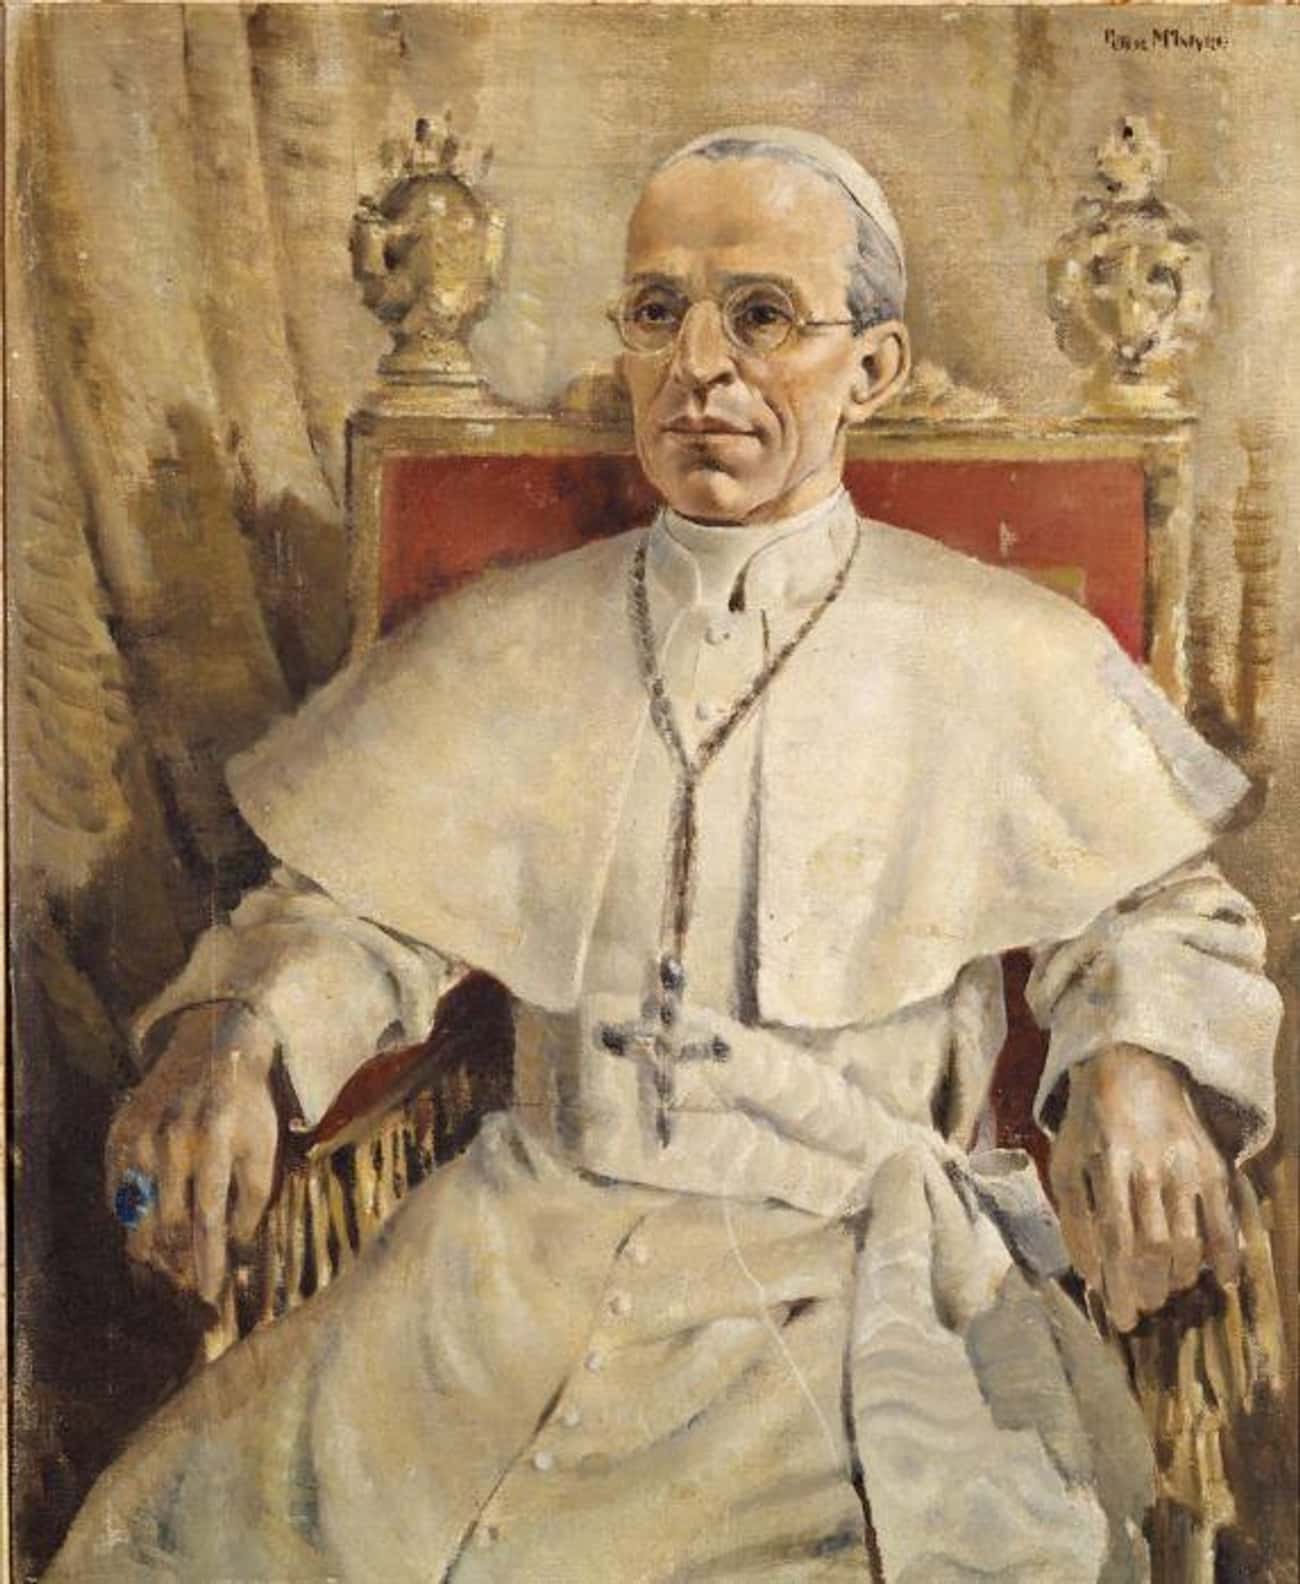 Proof That Pope Pius XII Supported Anti-Semitic Activity